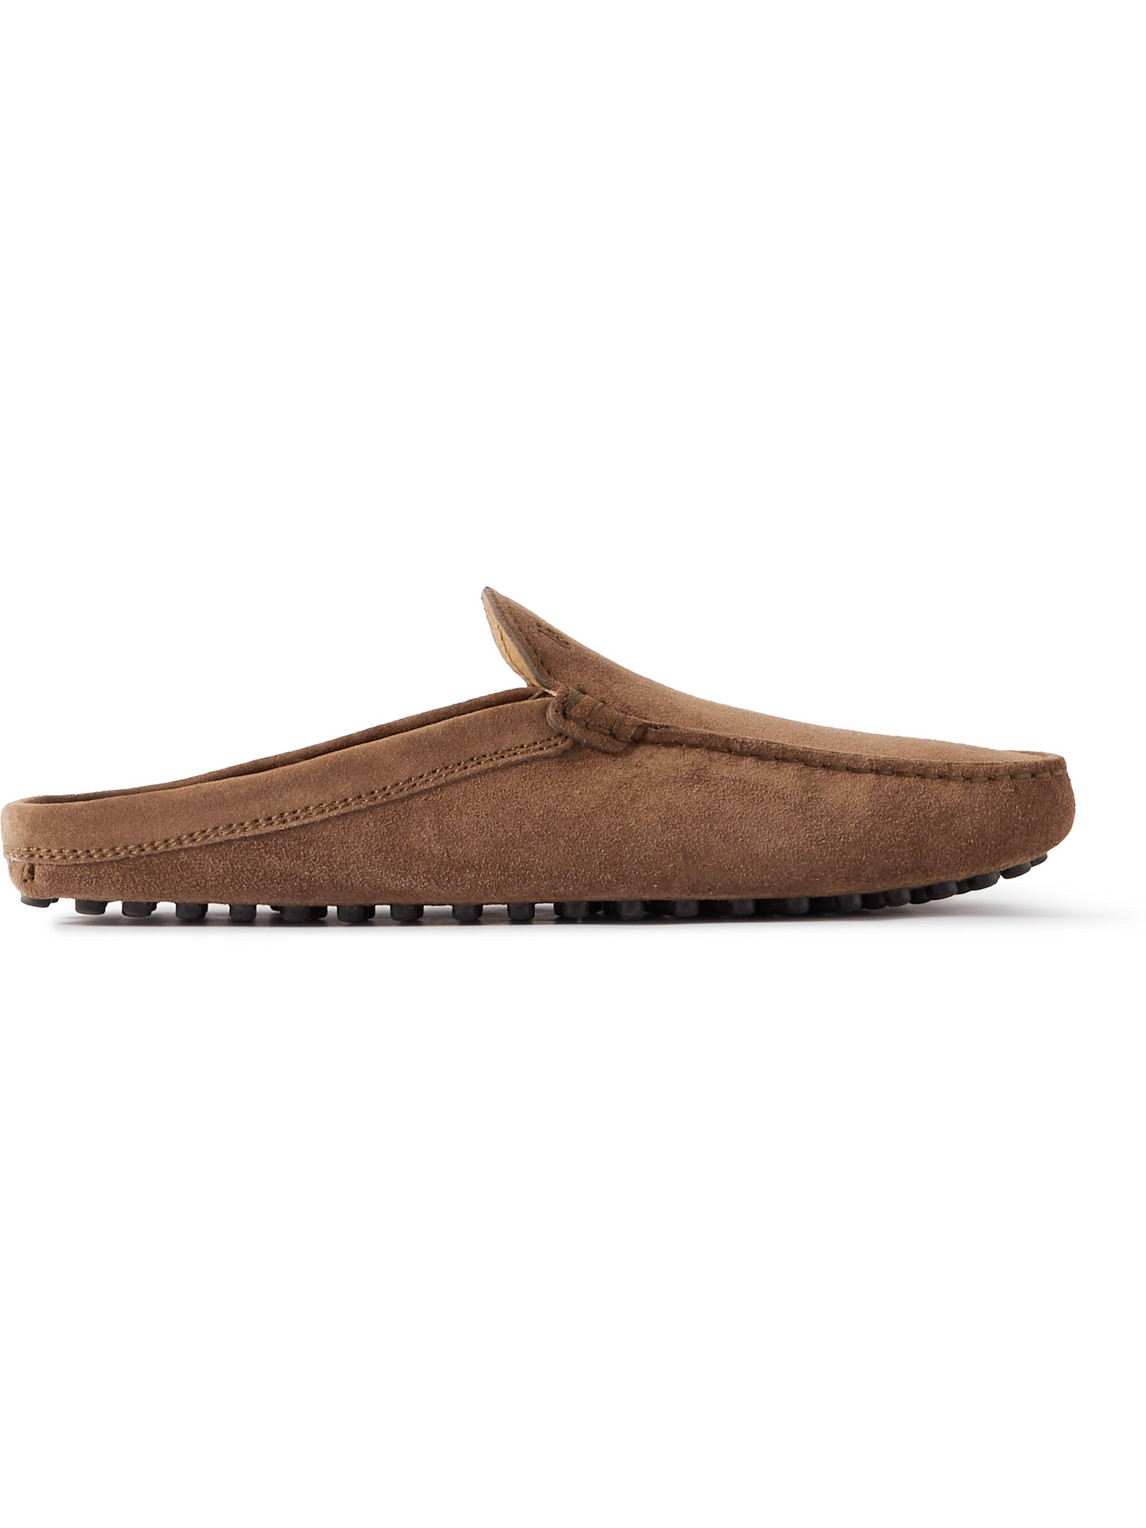 TOD'S GOMMINO SUEDE SLIPPERS